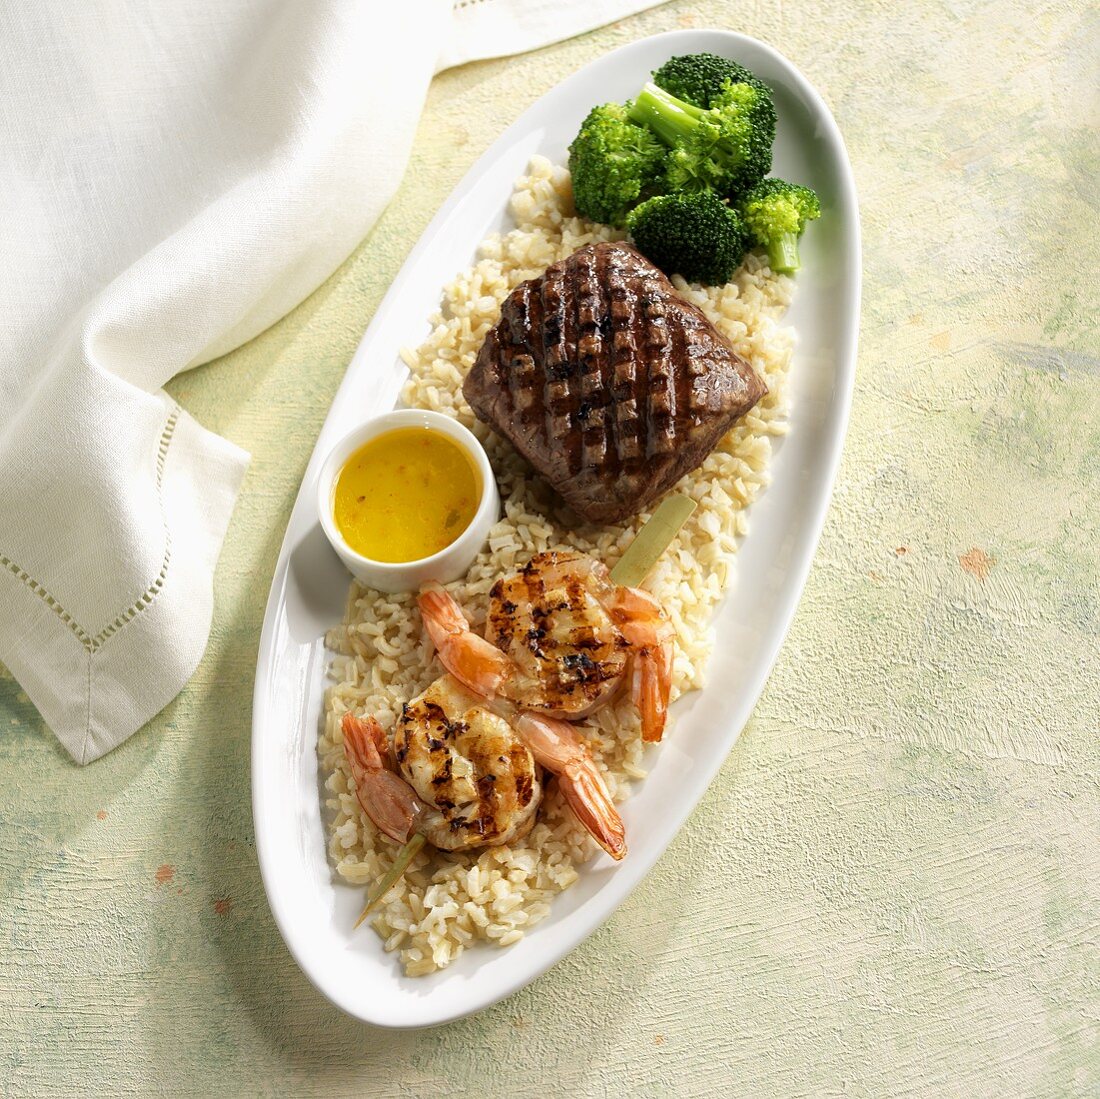 Surf & Turf on Brown Rice with Broccoli; Grilled Shrimp and Steak